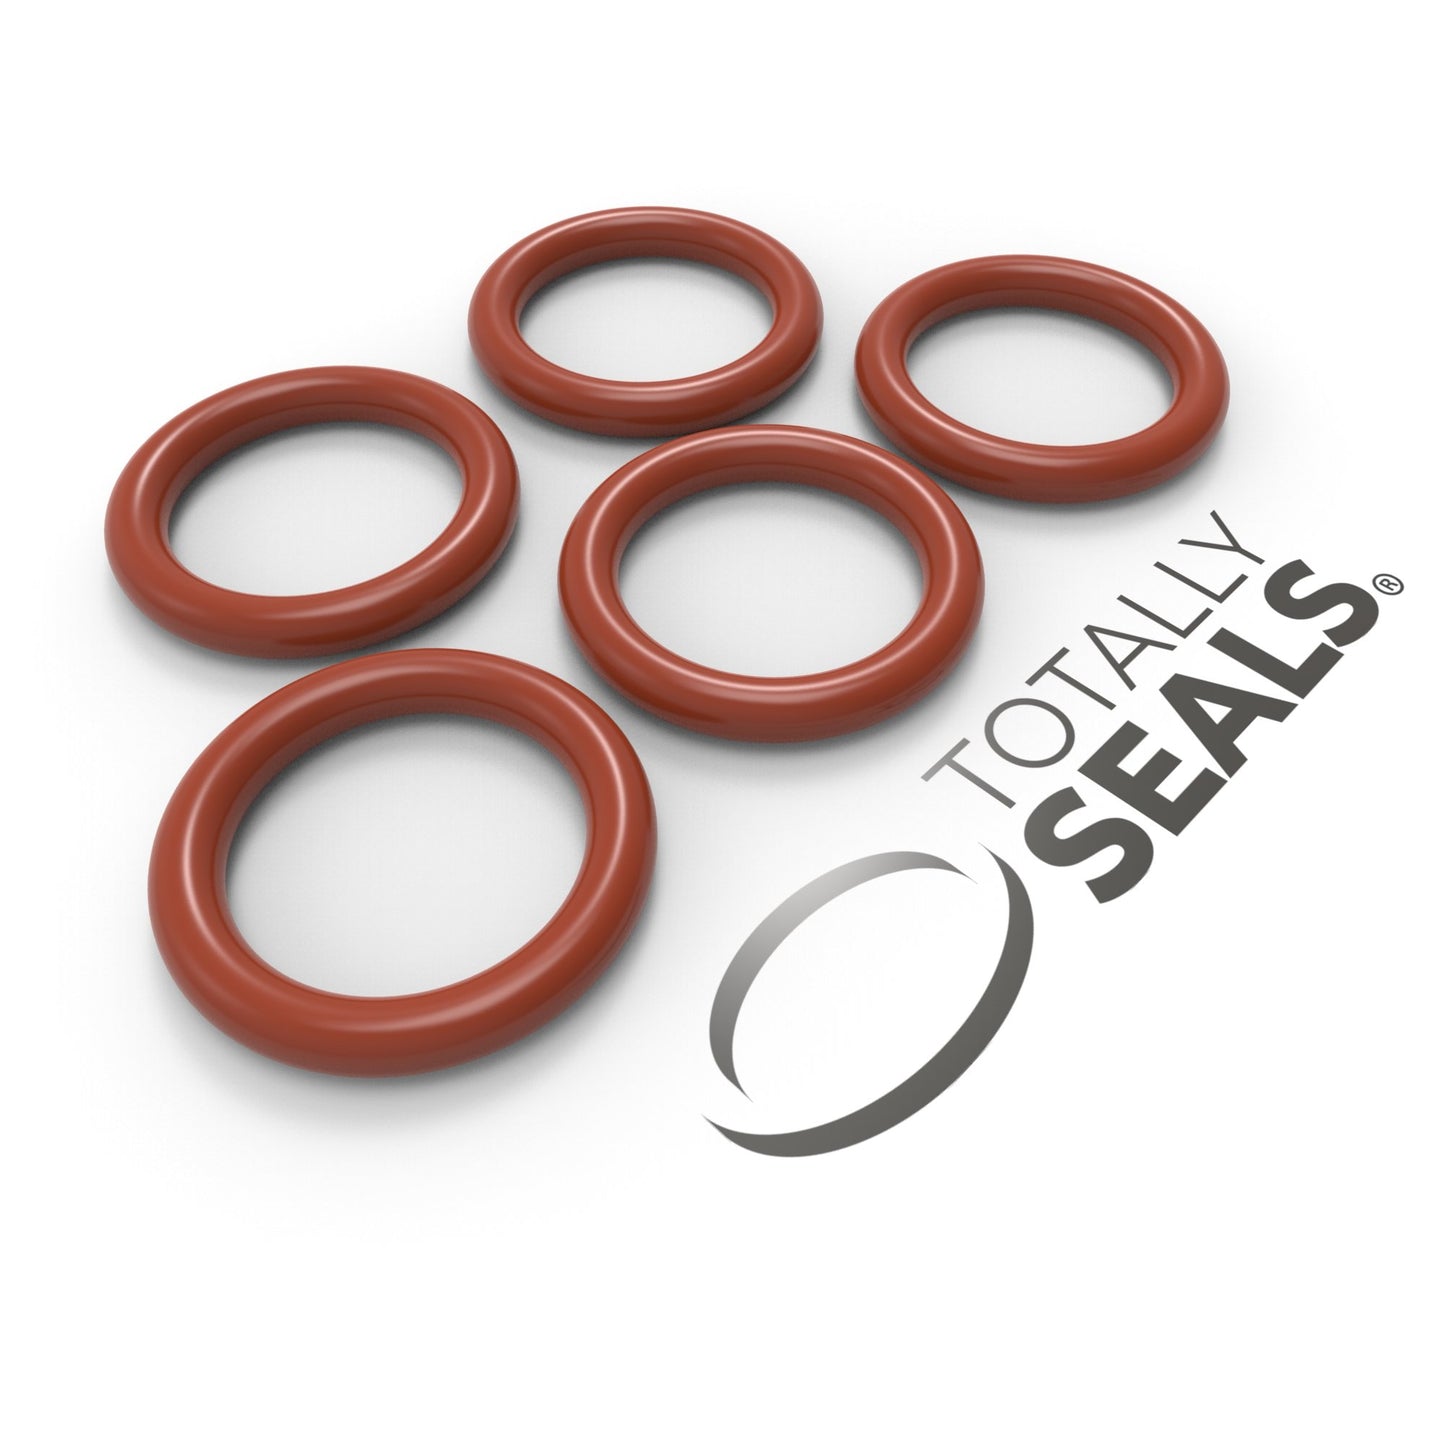 25mm x 2mm (29mm OD) Silicone O-Rings - Totally Seals®